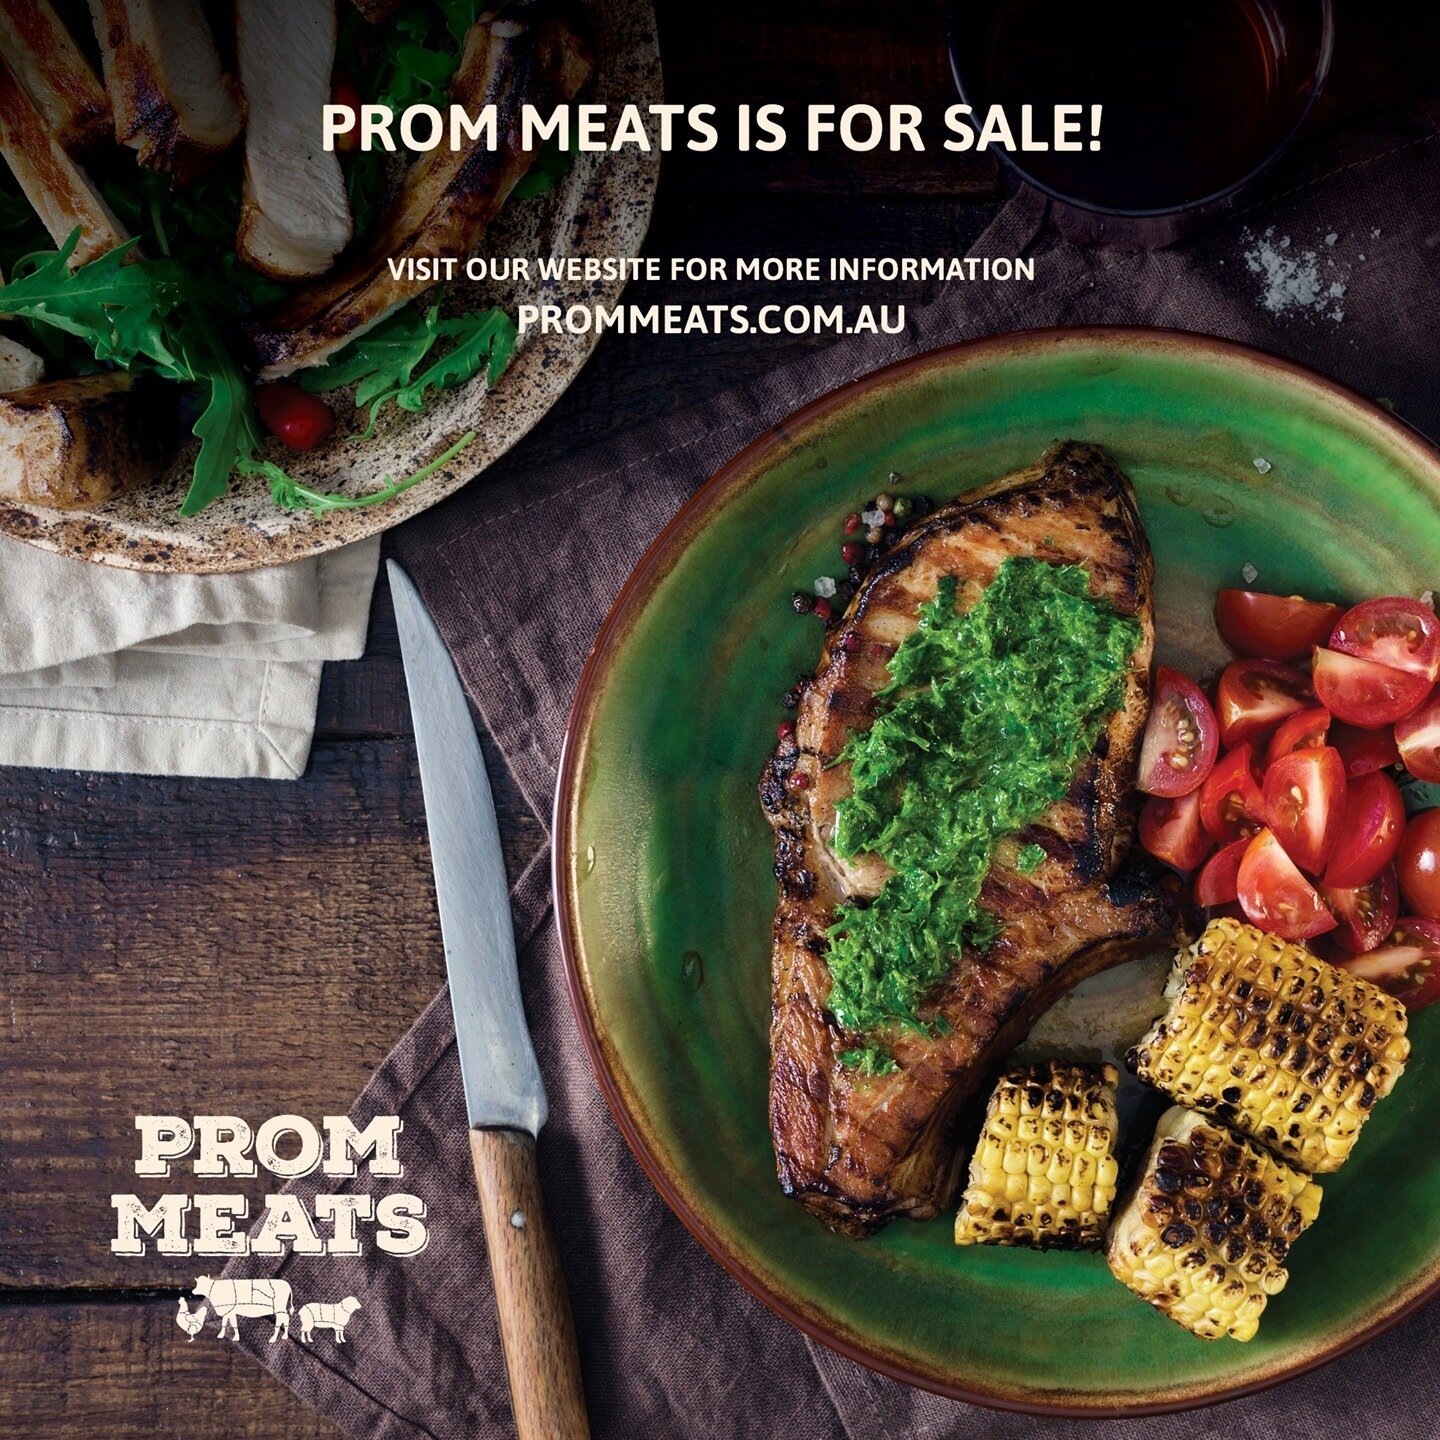 🌳☀️ Butcher by trade? Looking for your next venture? The Prom Meats business is for sale and is located in glorious South Gippsland surrounded by rolling hills and a short drive to iconic Wilsons Promontory. John and Mohya are selling their successf